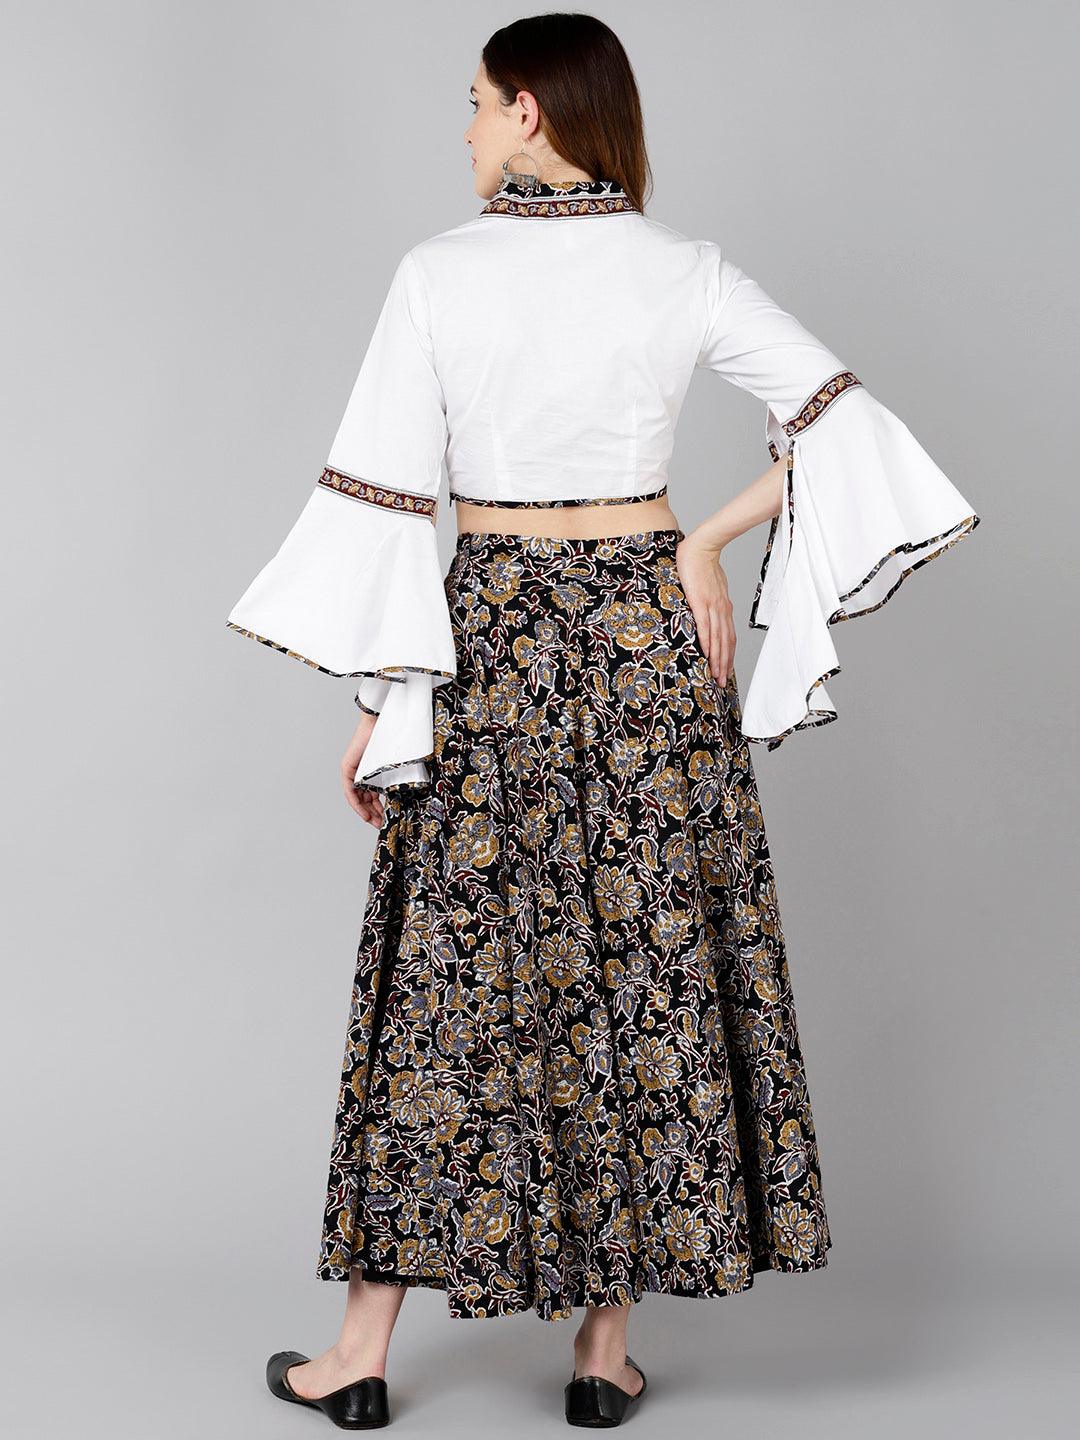 Designer White Crop Top With Floral Printed Skirt - Znxclothing